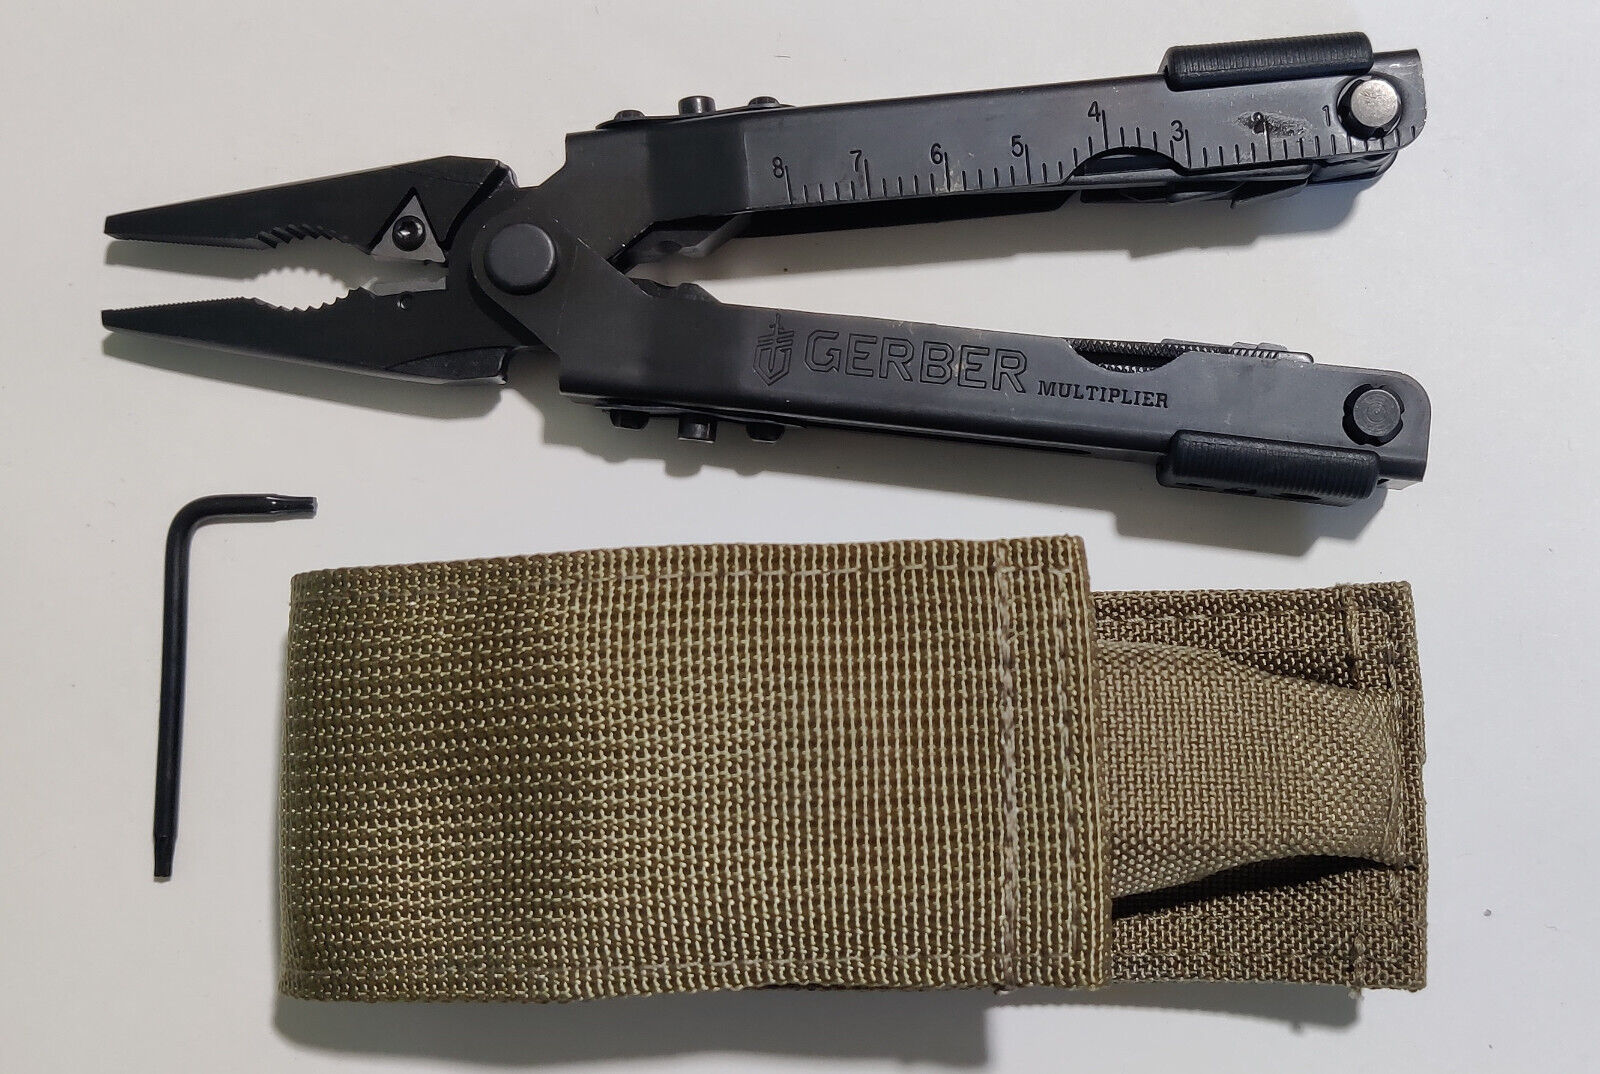 Genuine Military Gerber Multi-Plier MP600 Multi-Tool with Pouch